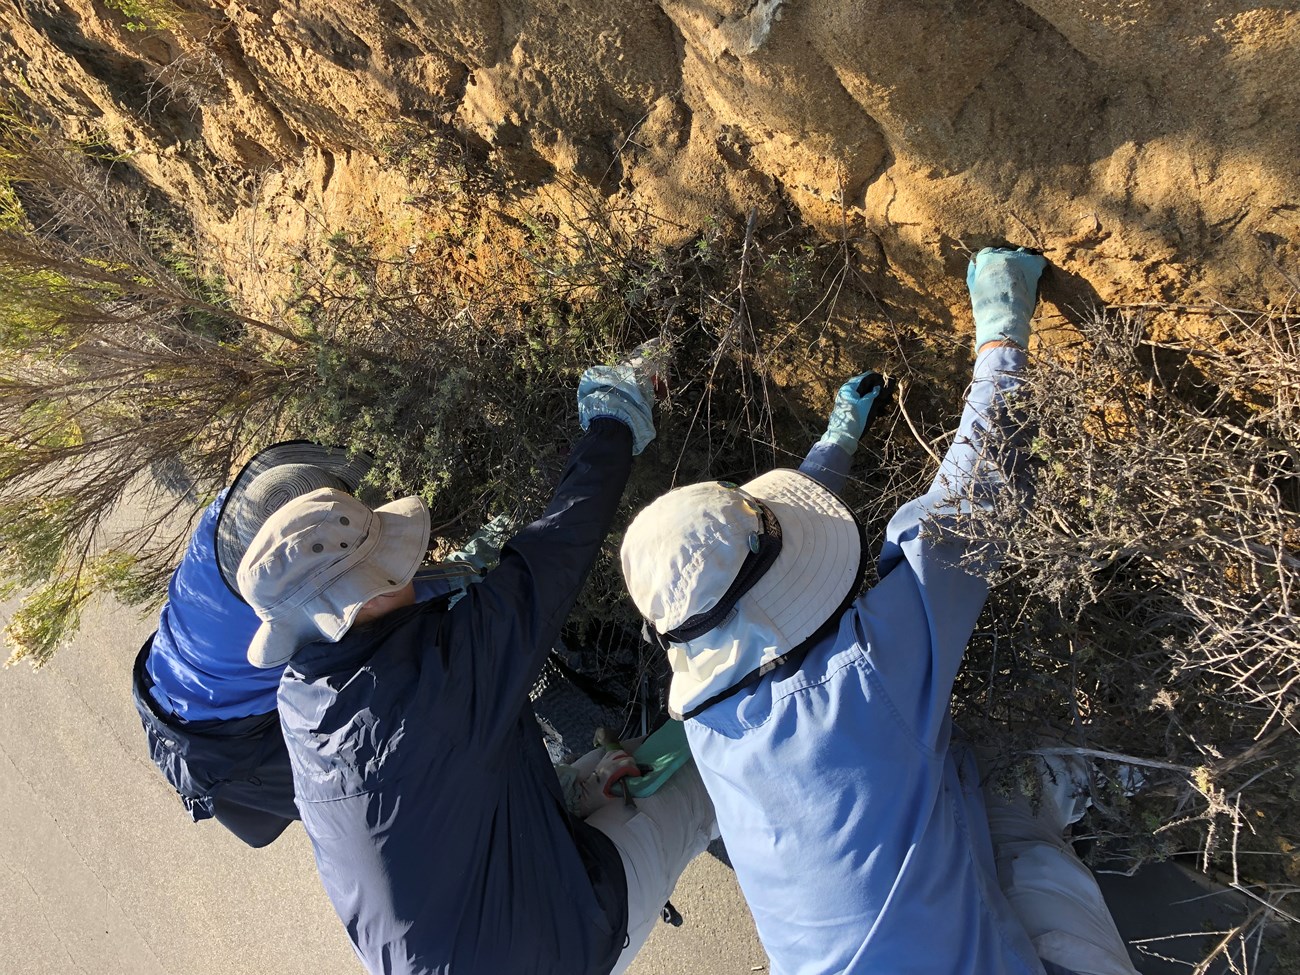 Three park volunteers in an assortment of blue and white clothing and green gloves crouch near the base of a cliff and pull invasive plant species.